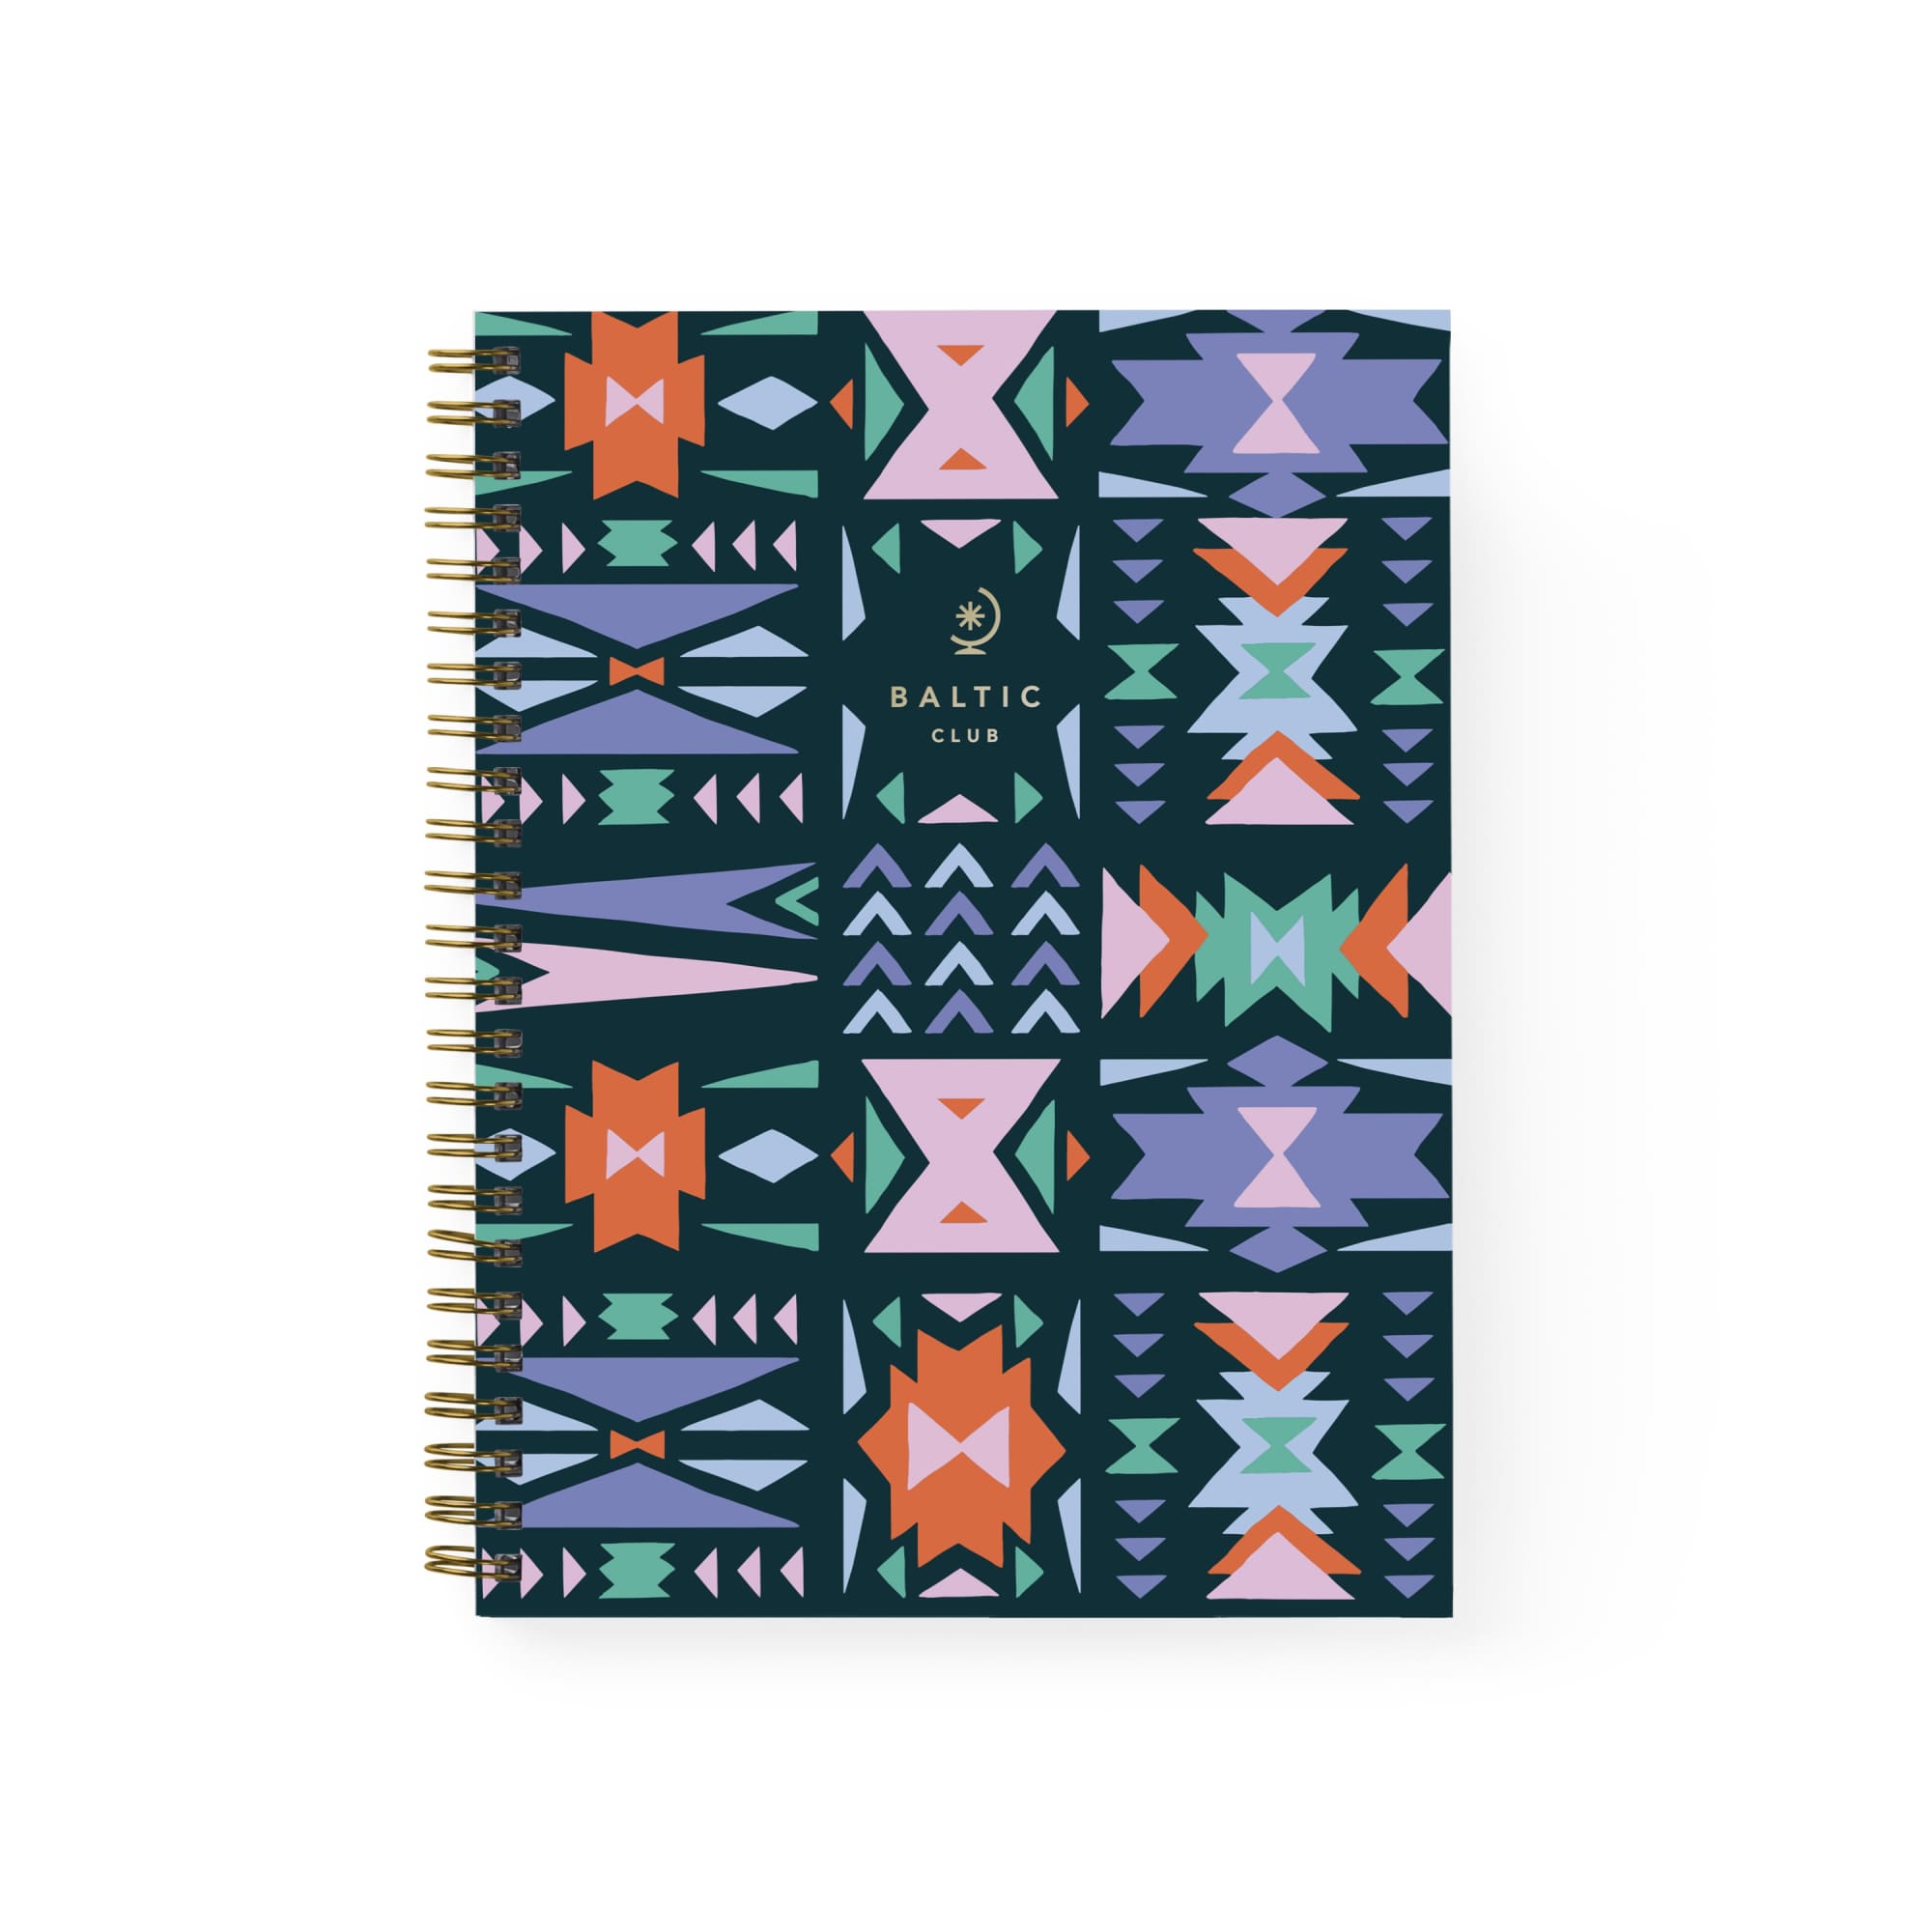 Land Spiral Notebook | The Baltic Club